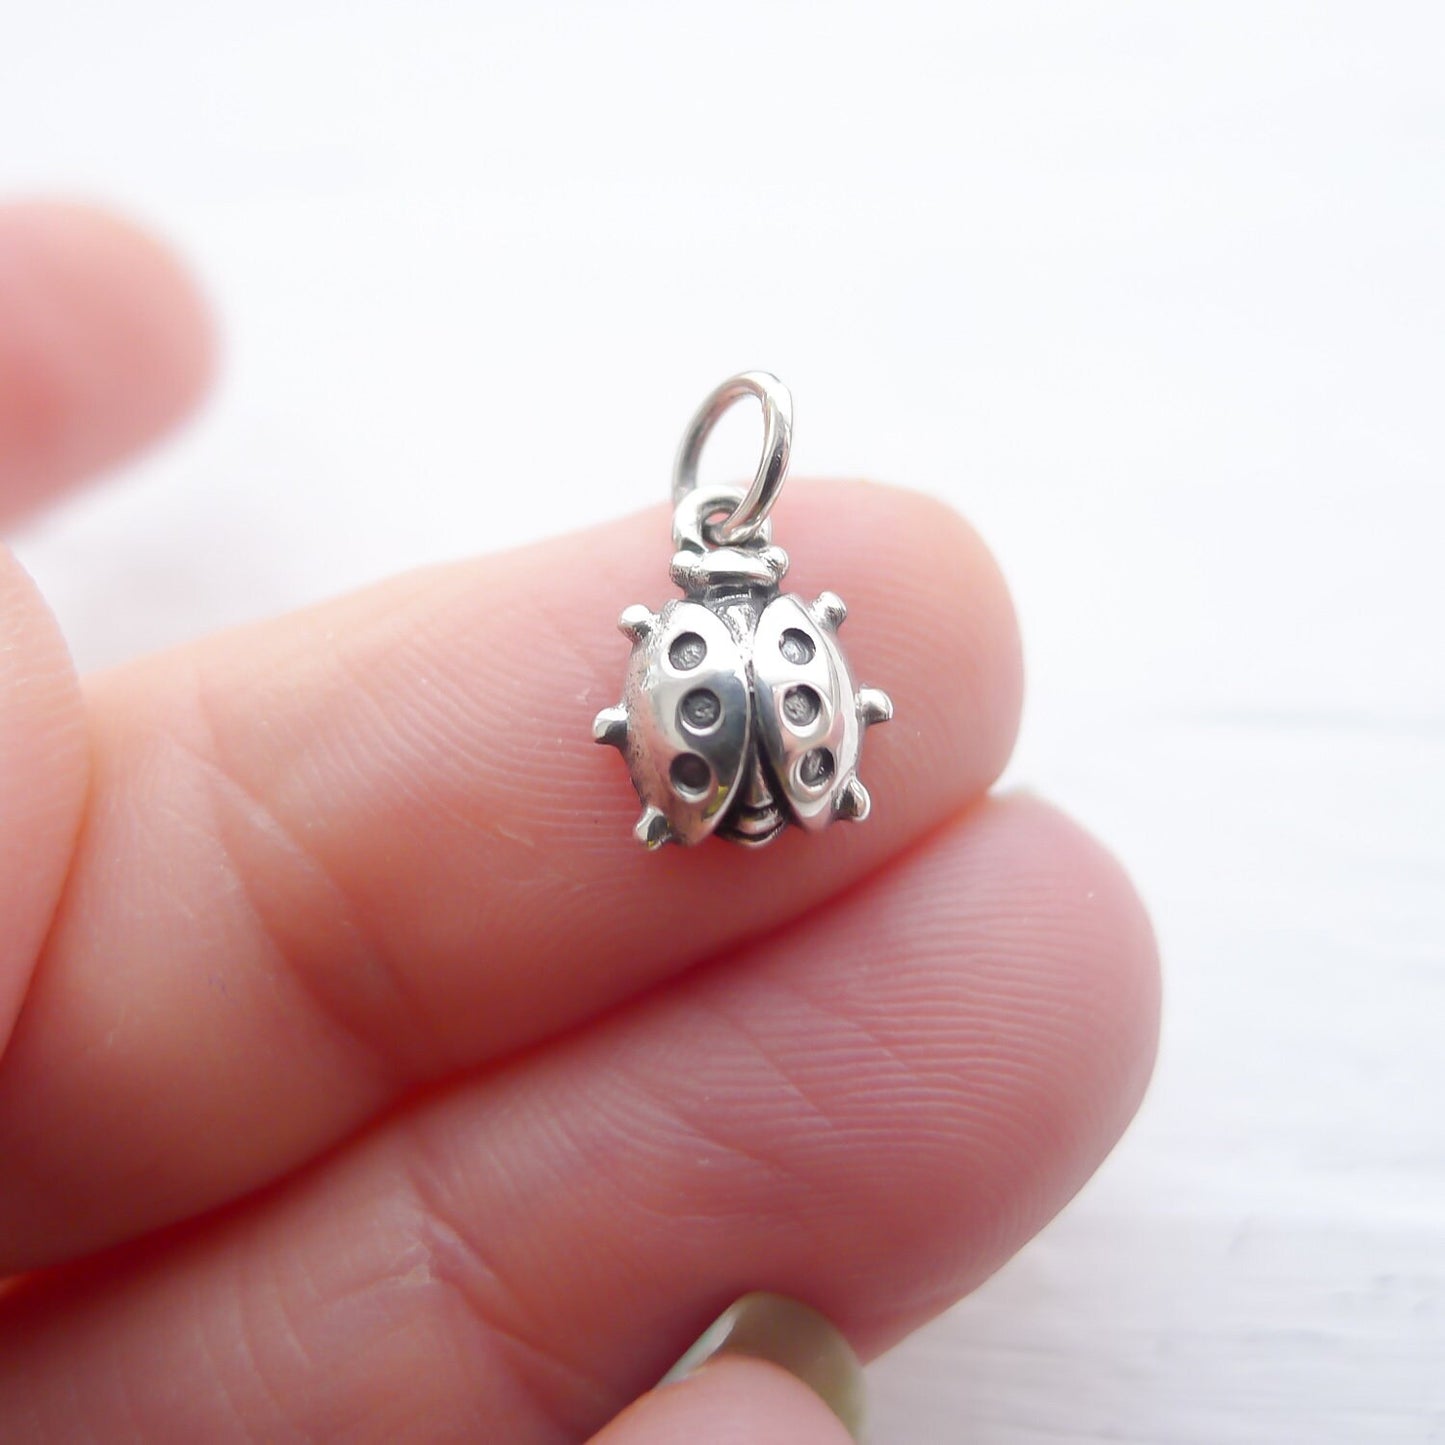 Ladybug Charm Lady Bug Pendant Sterling Silver Cute Jewelry Making Supplies